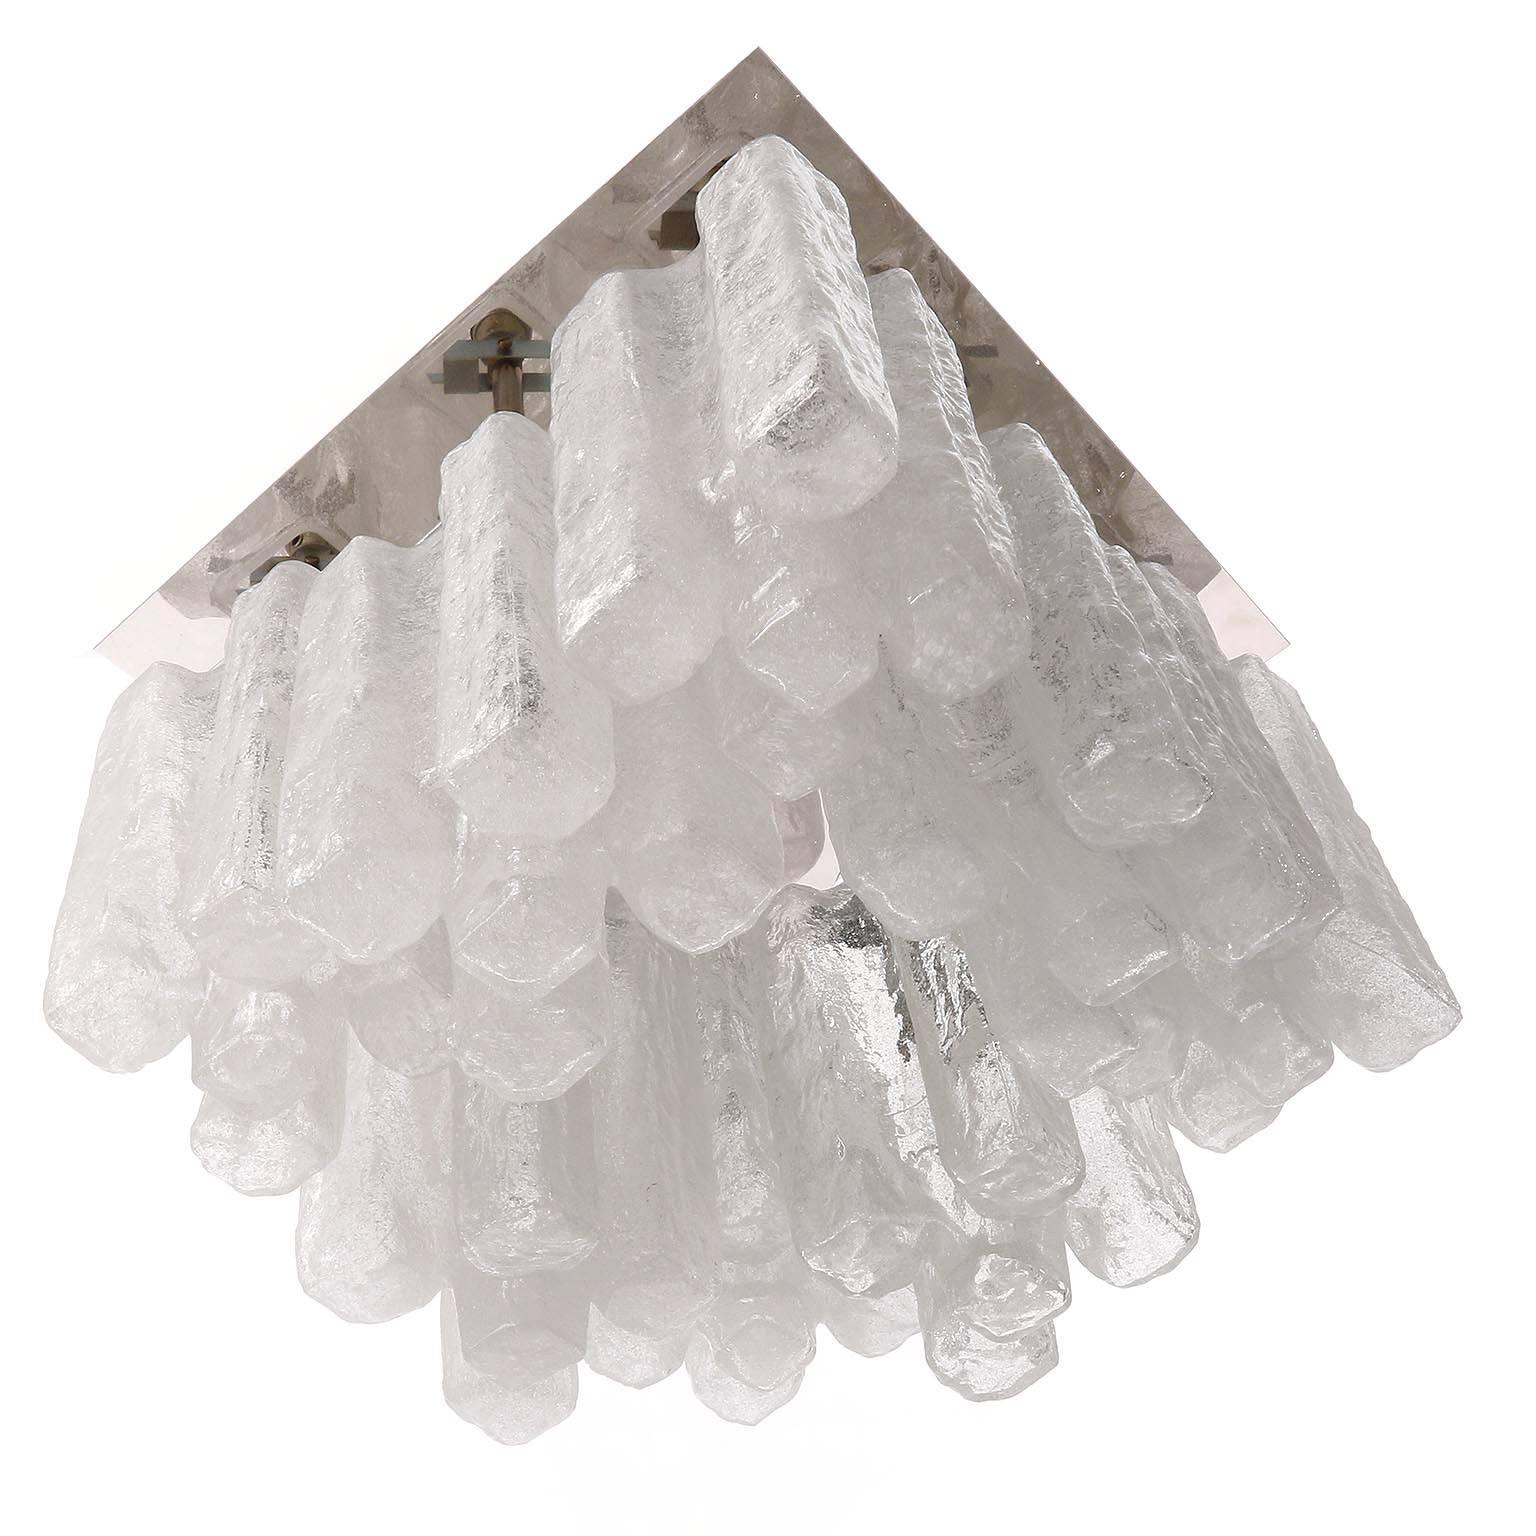 One of nine square light fixtures by Kalmar, Austria, manufactured in Mid-Century, circa 1970 (late 1960s or early 1970s). 
Each fixture has eight sockets for small screw base bulbs E14 (e.g. LED or filament, max. 40 W per bulb) which are covered